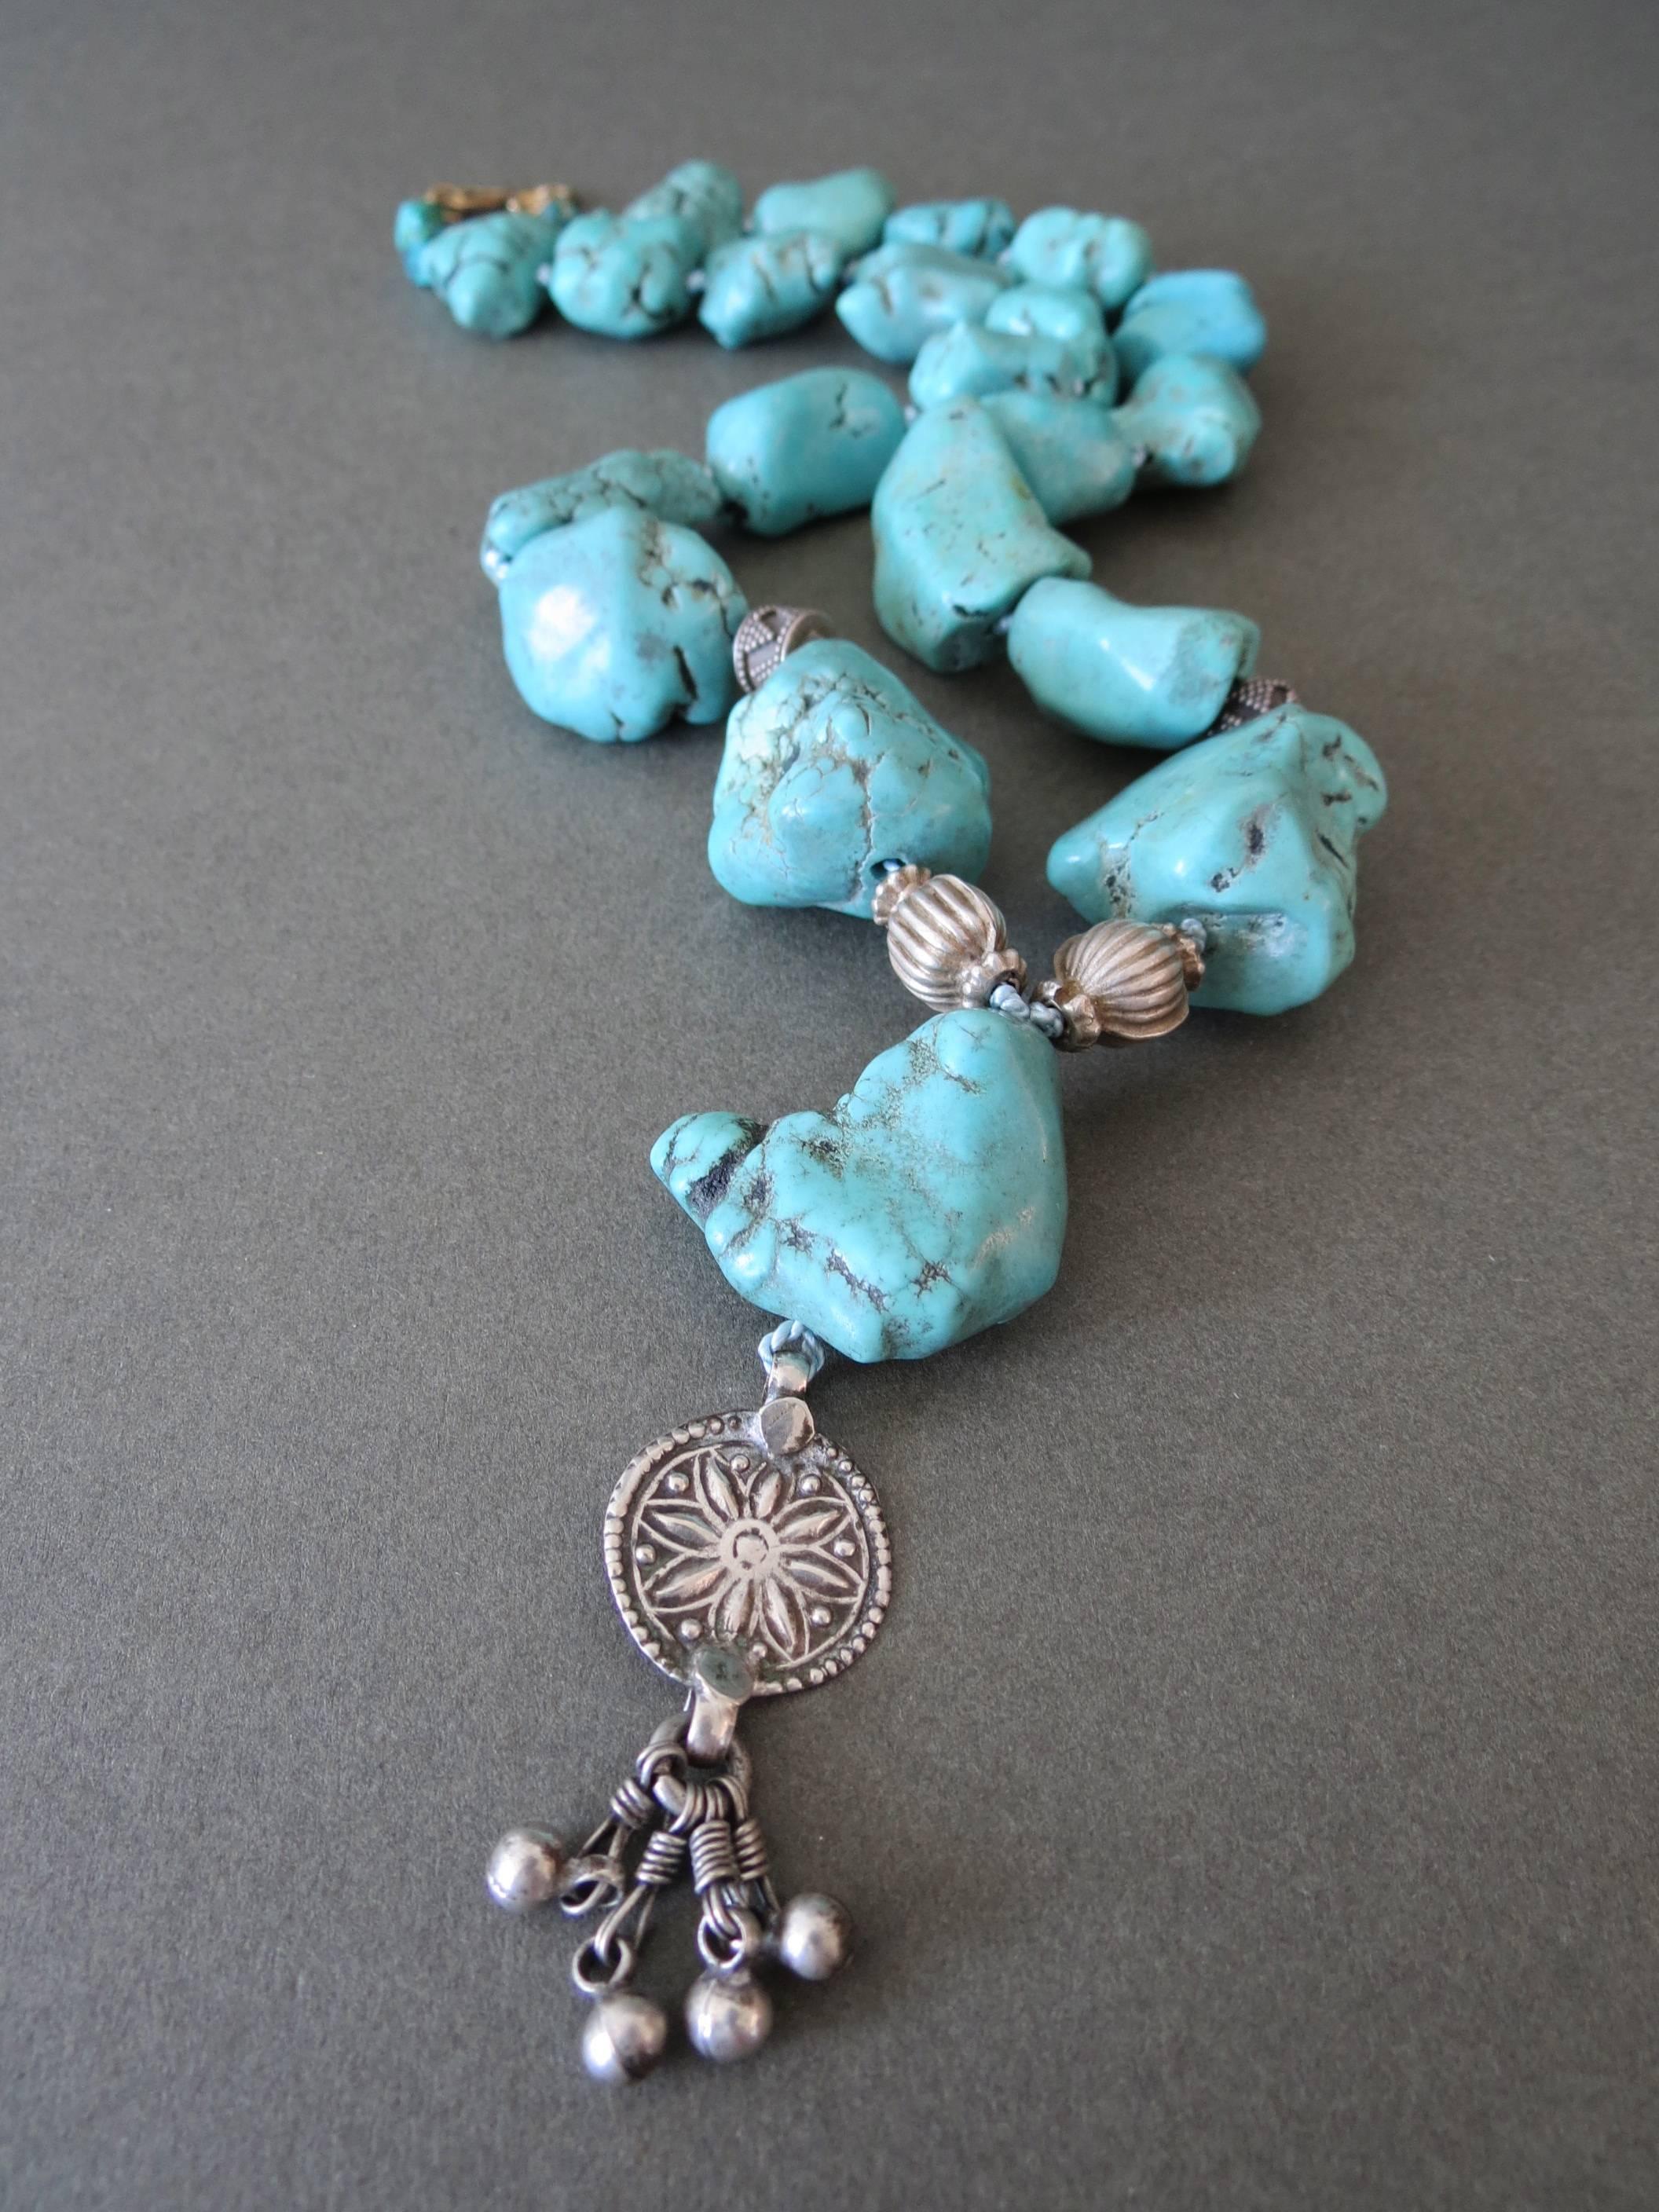 This lovely long and heavy blue turquoise nugget bead necklace . The necklace has pretty decorated silver filigree details . It has been restrung.
Item Specifics
Full length: 63cm (approx 24.50